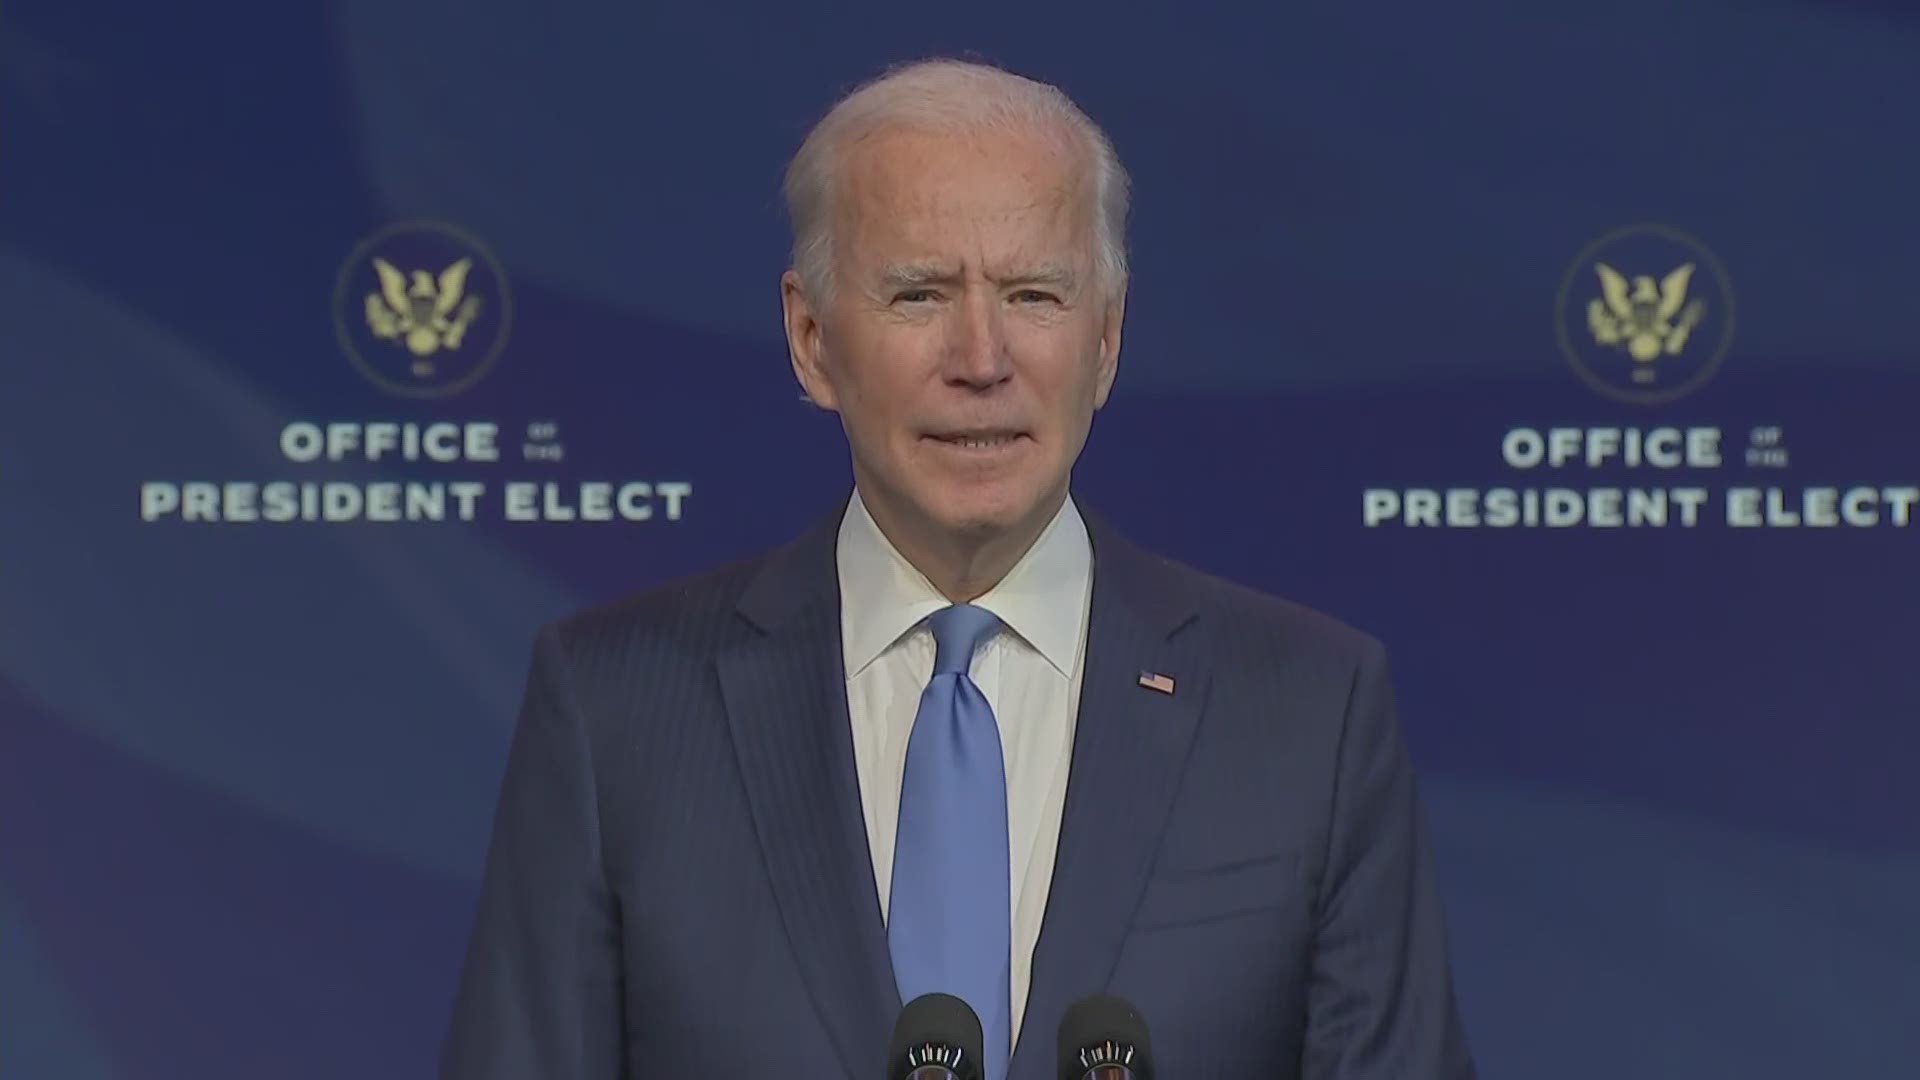 Arguing that “there is no political influence” in the COVID-19 vaccine, Biden stressed the scientific research that has “led us to this point.”